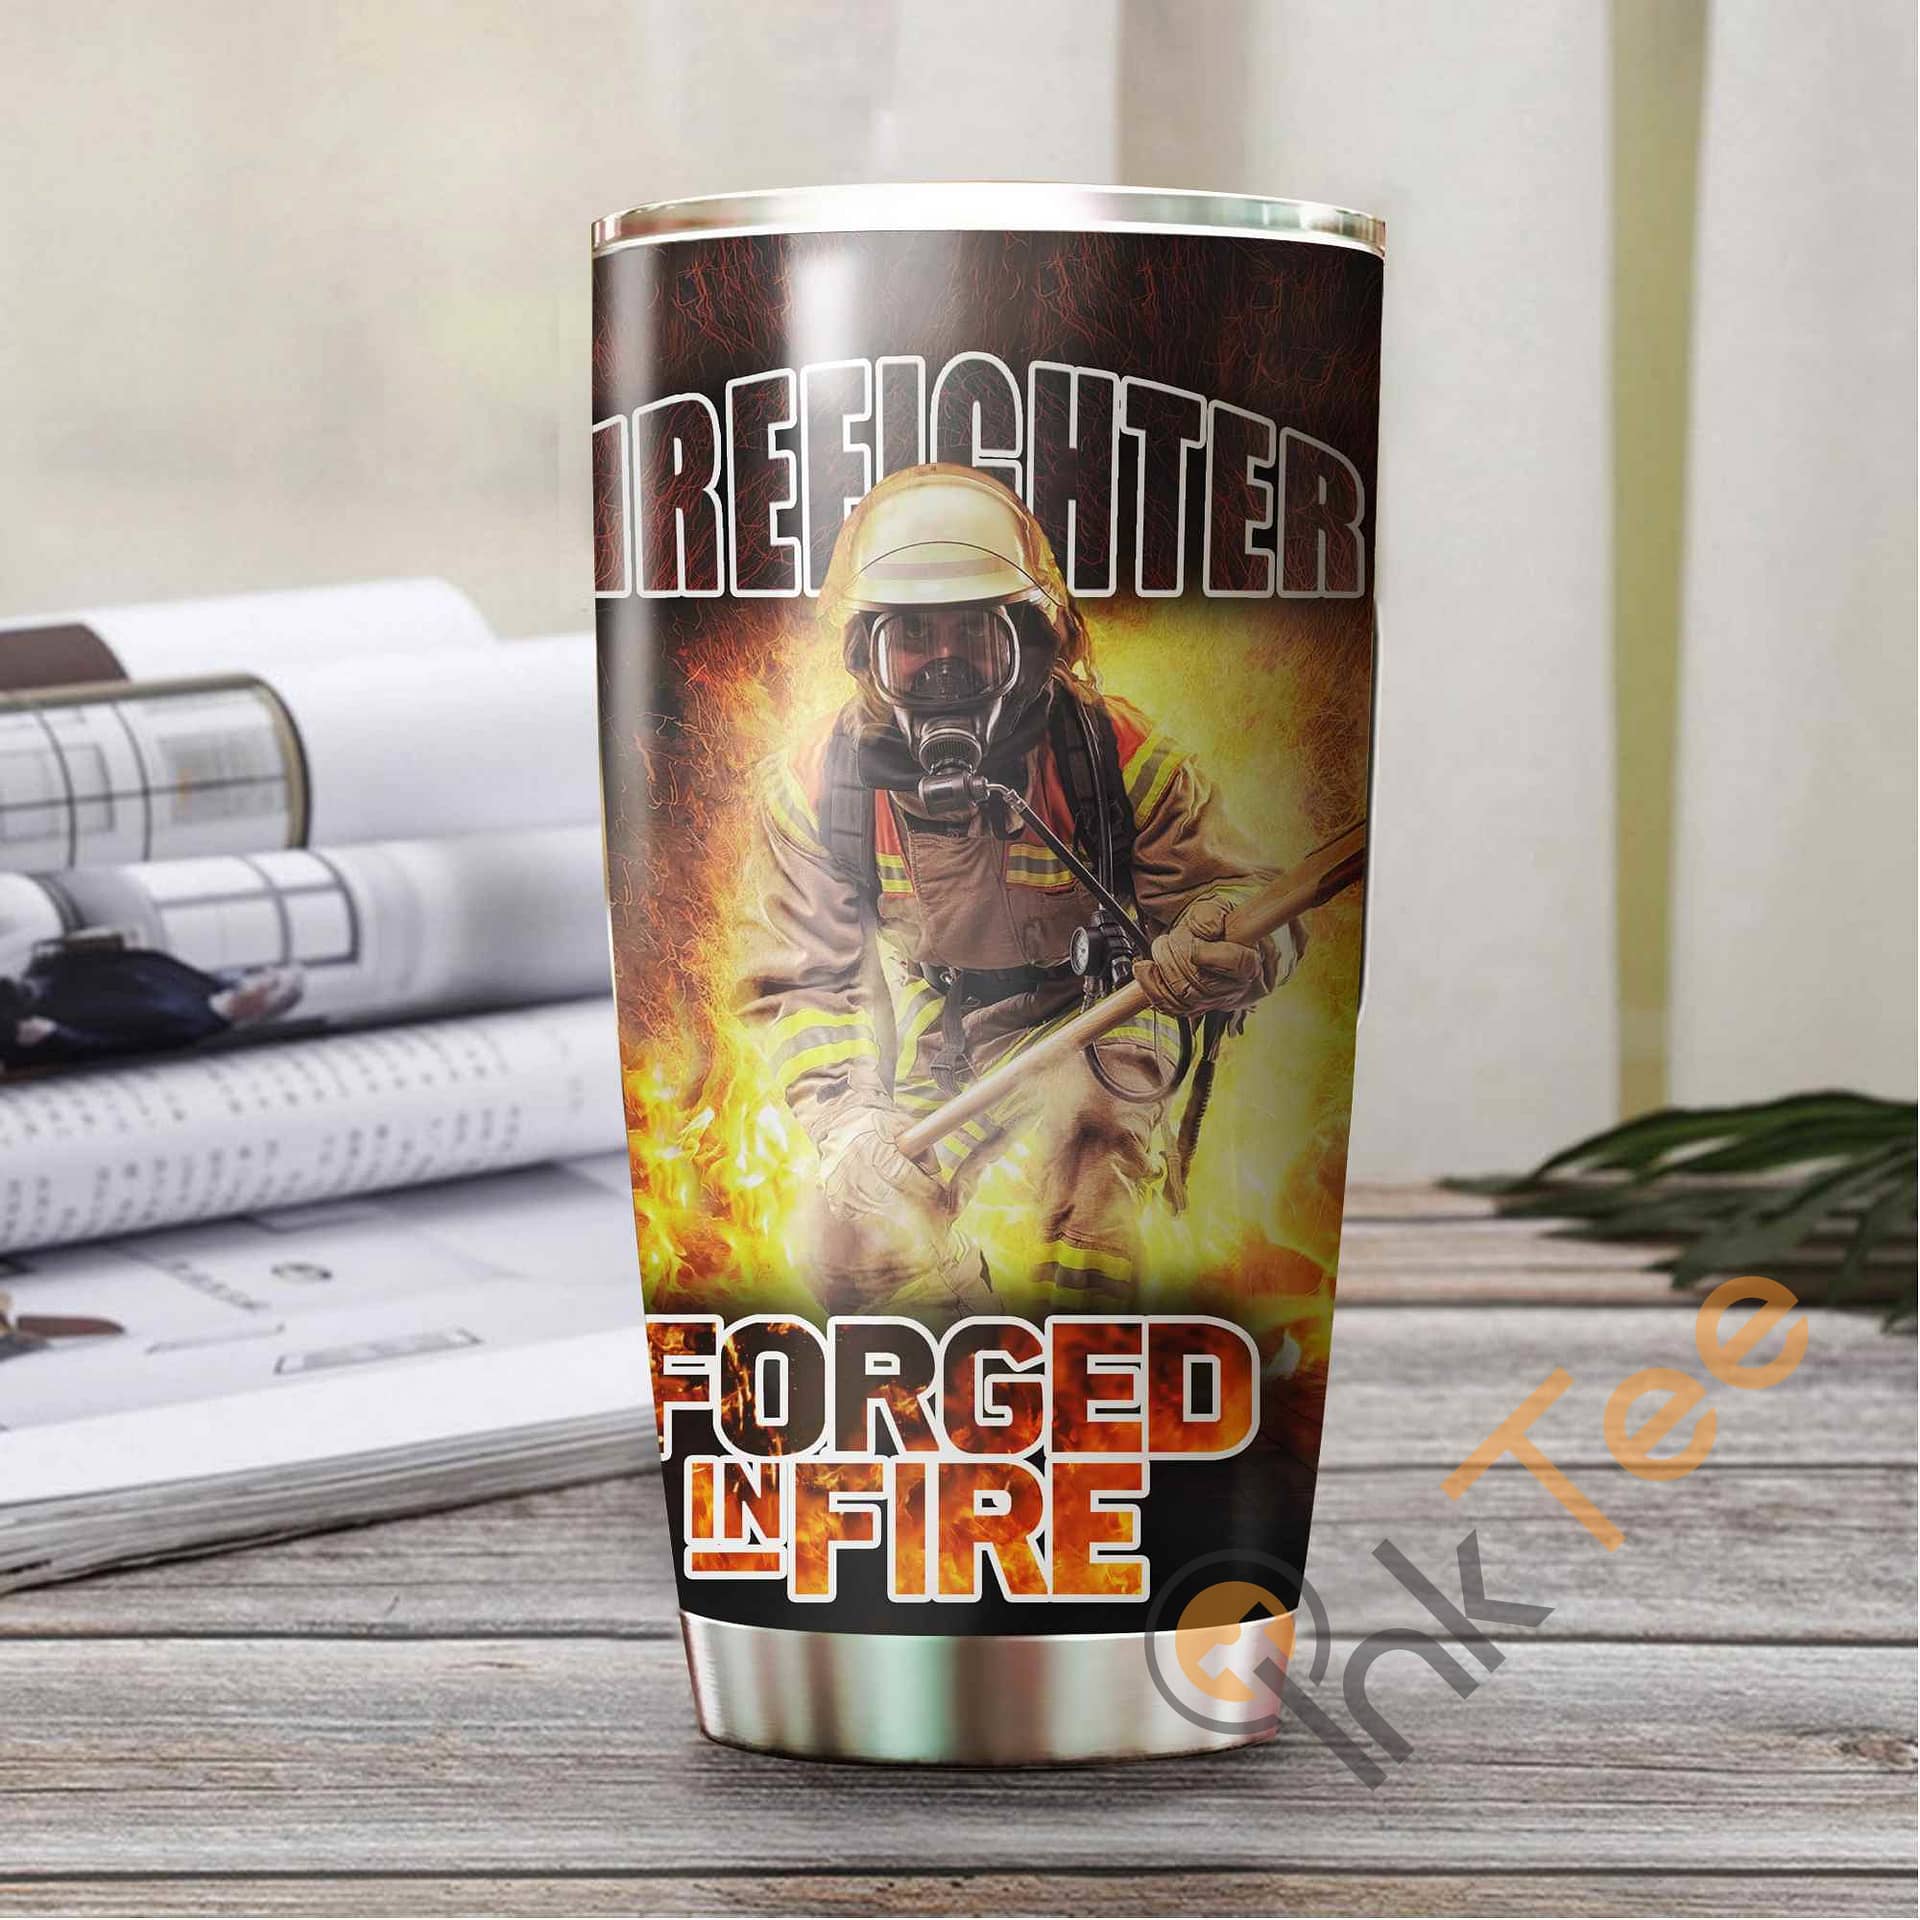 Firefighter Forged In Fire Amazon Best Seller Sku 2898 Stainless Steel Tumbler